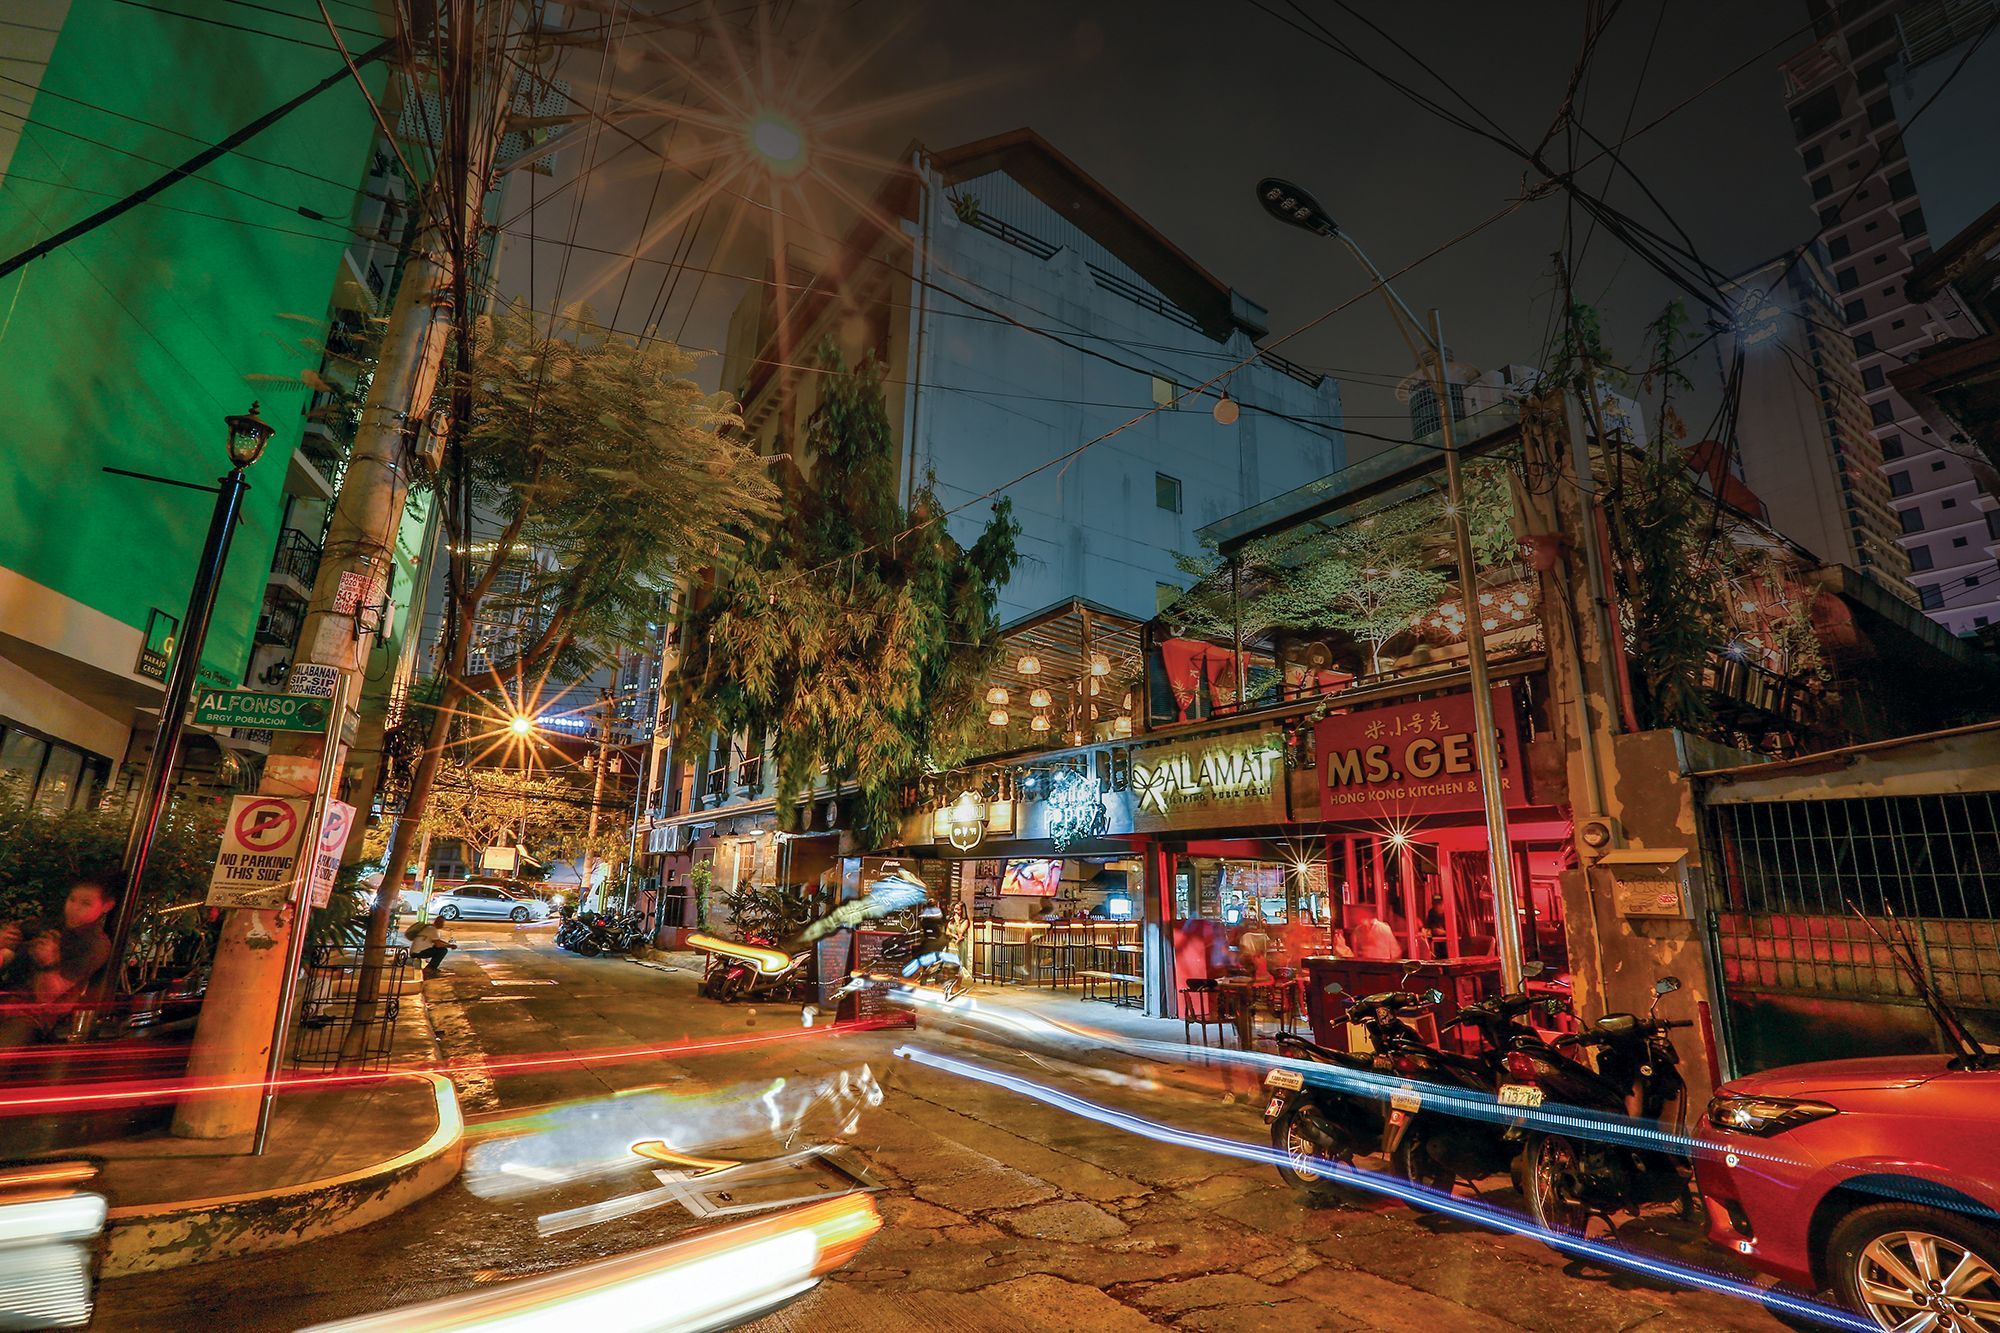 Ms. Gee's facade can be seen in Poblacion at night  | Photo: Tatler Philippines